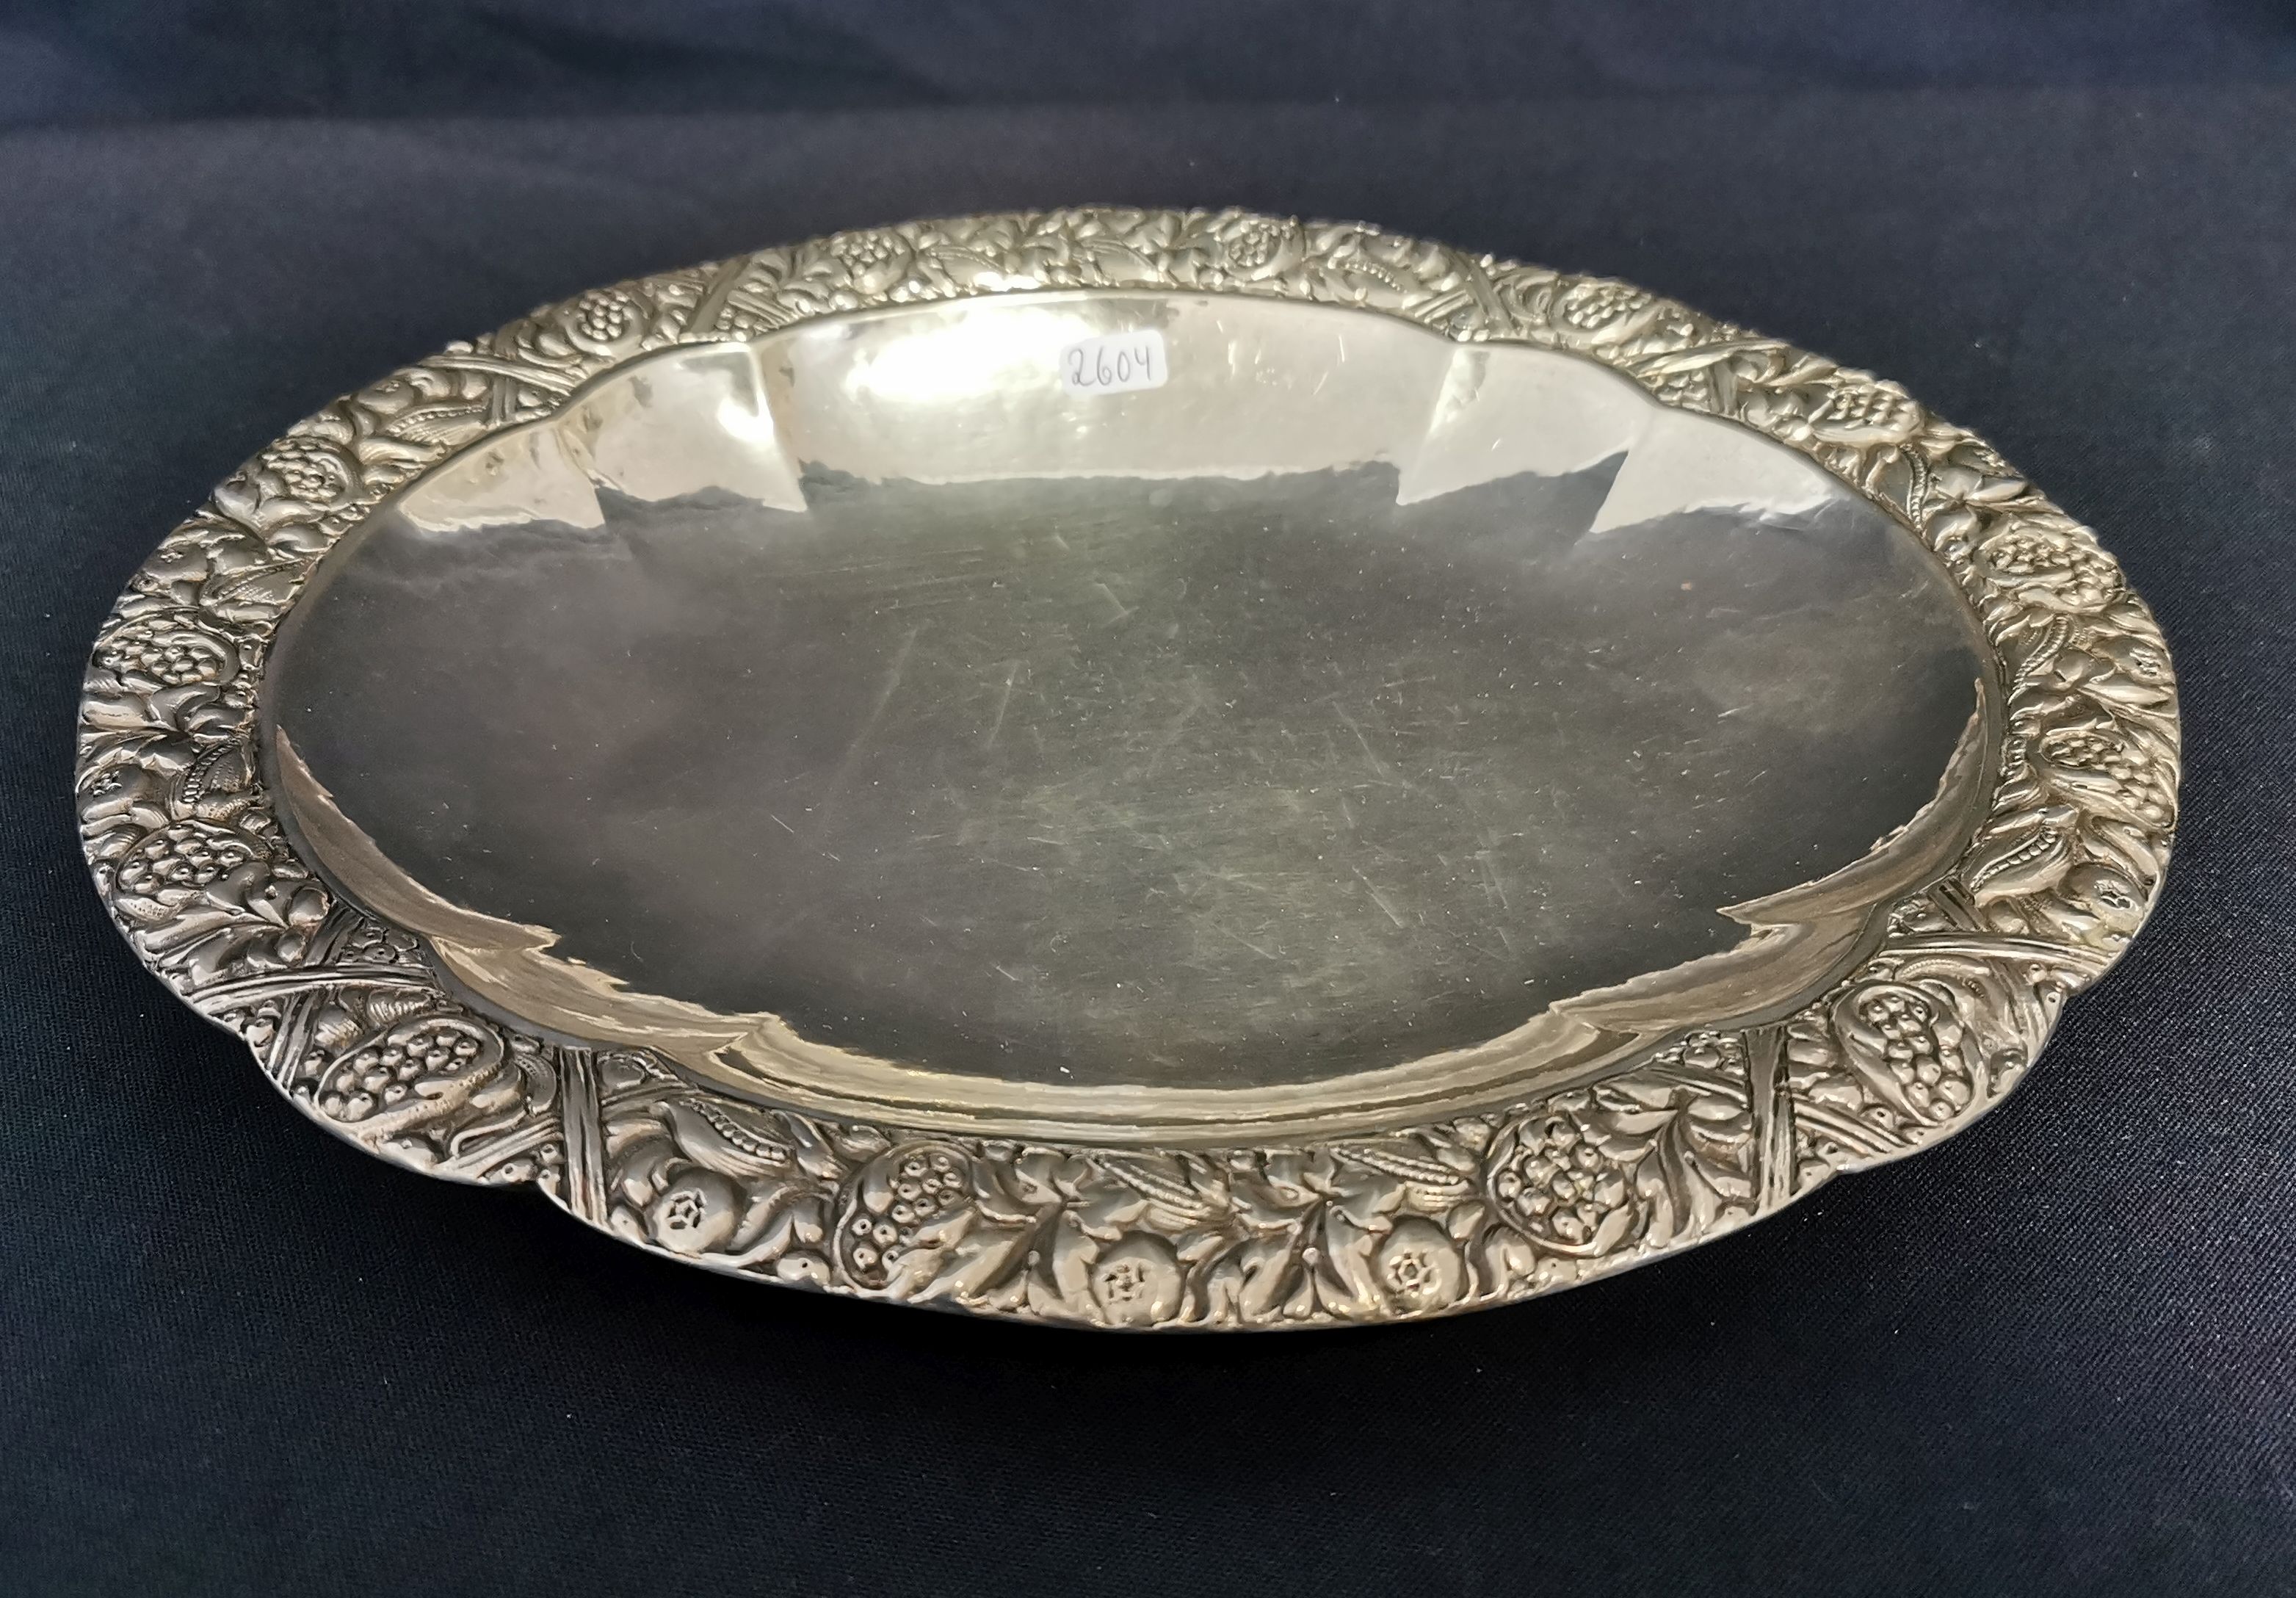 OVAL BOWL WITH RELIEF DECOR